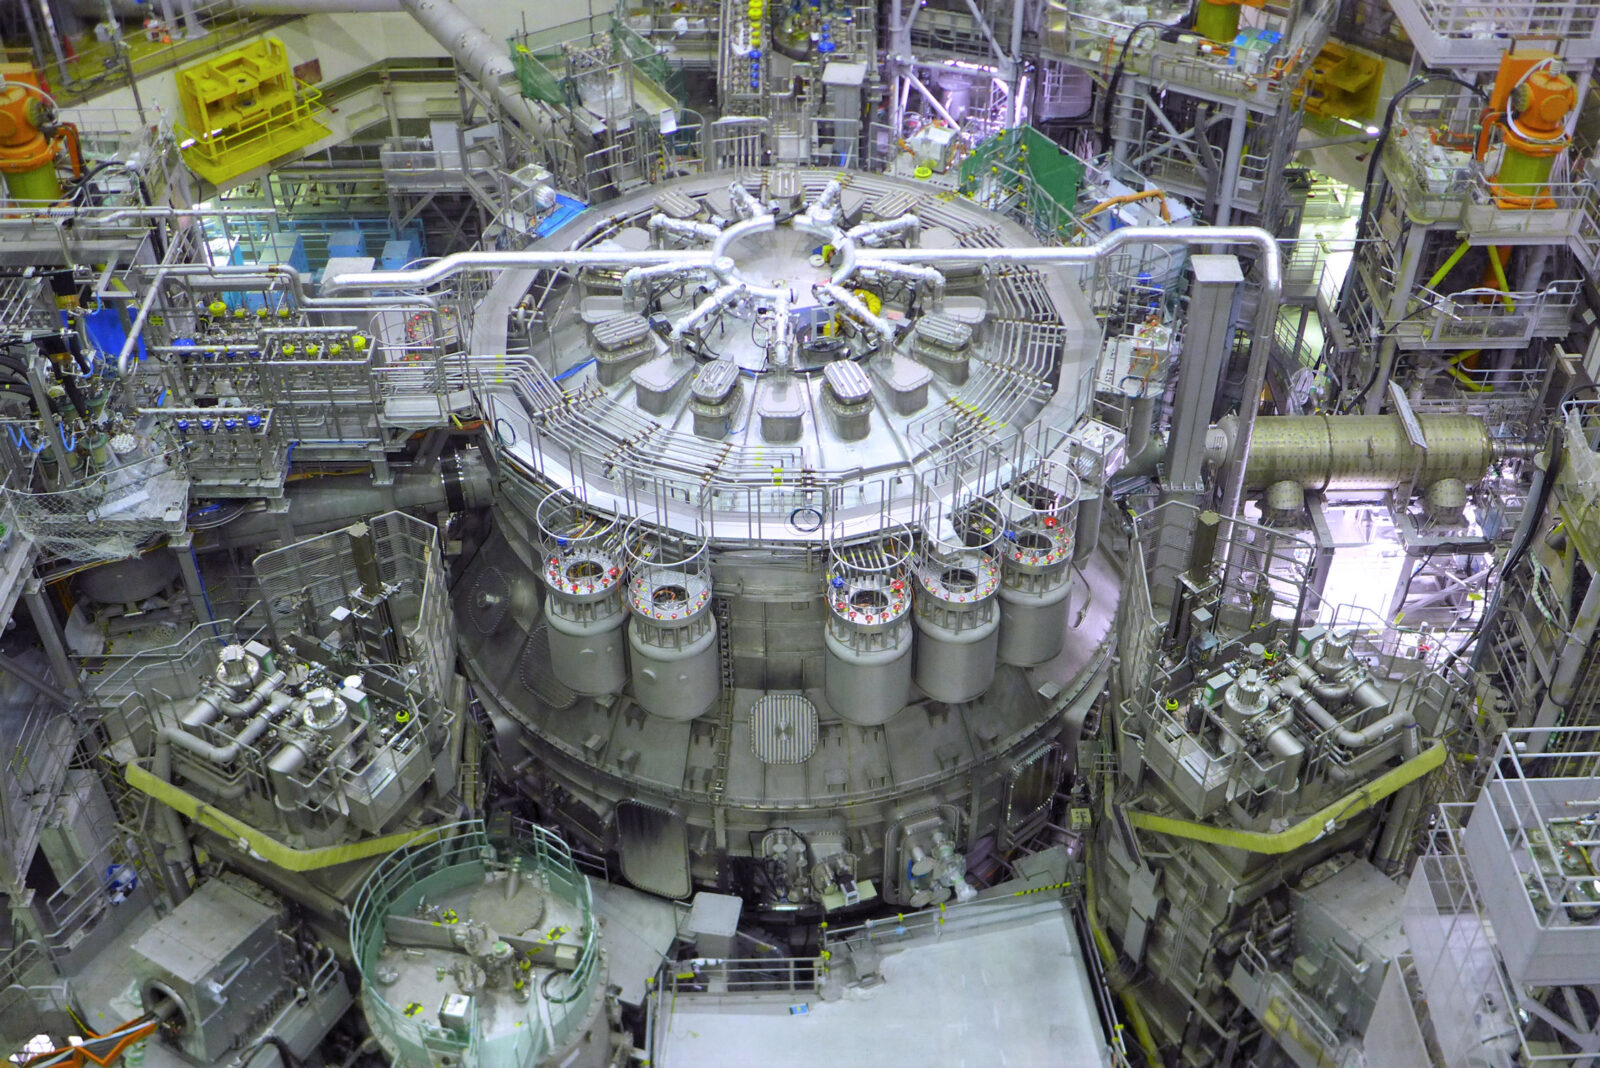 Launching the largest fusion reactor in the world!  This is not over yet